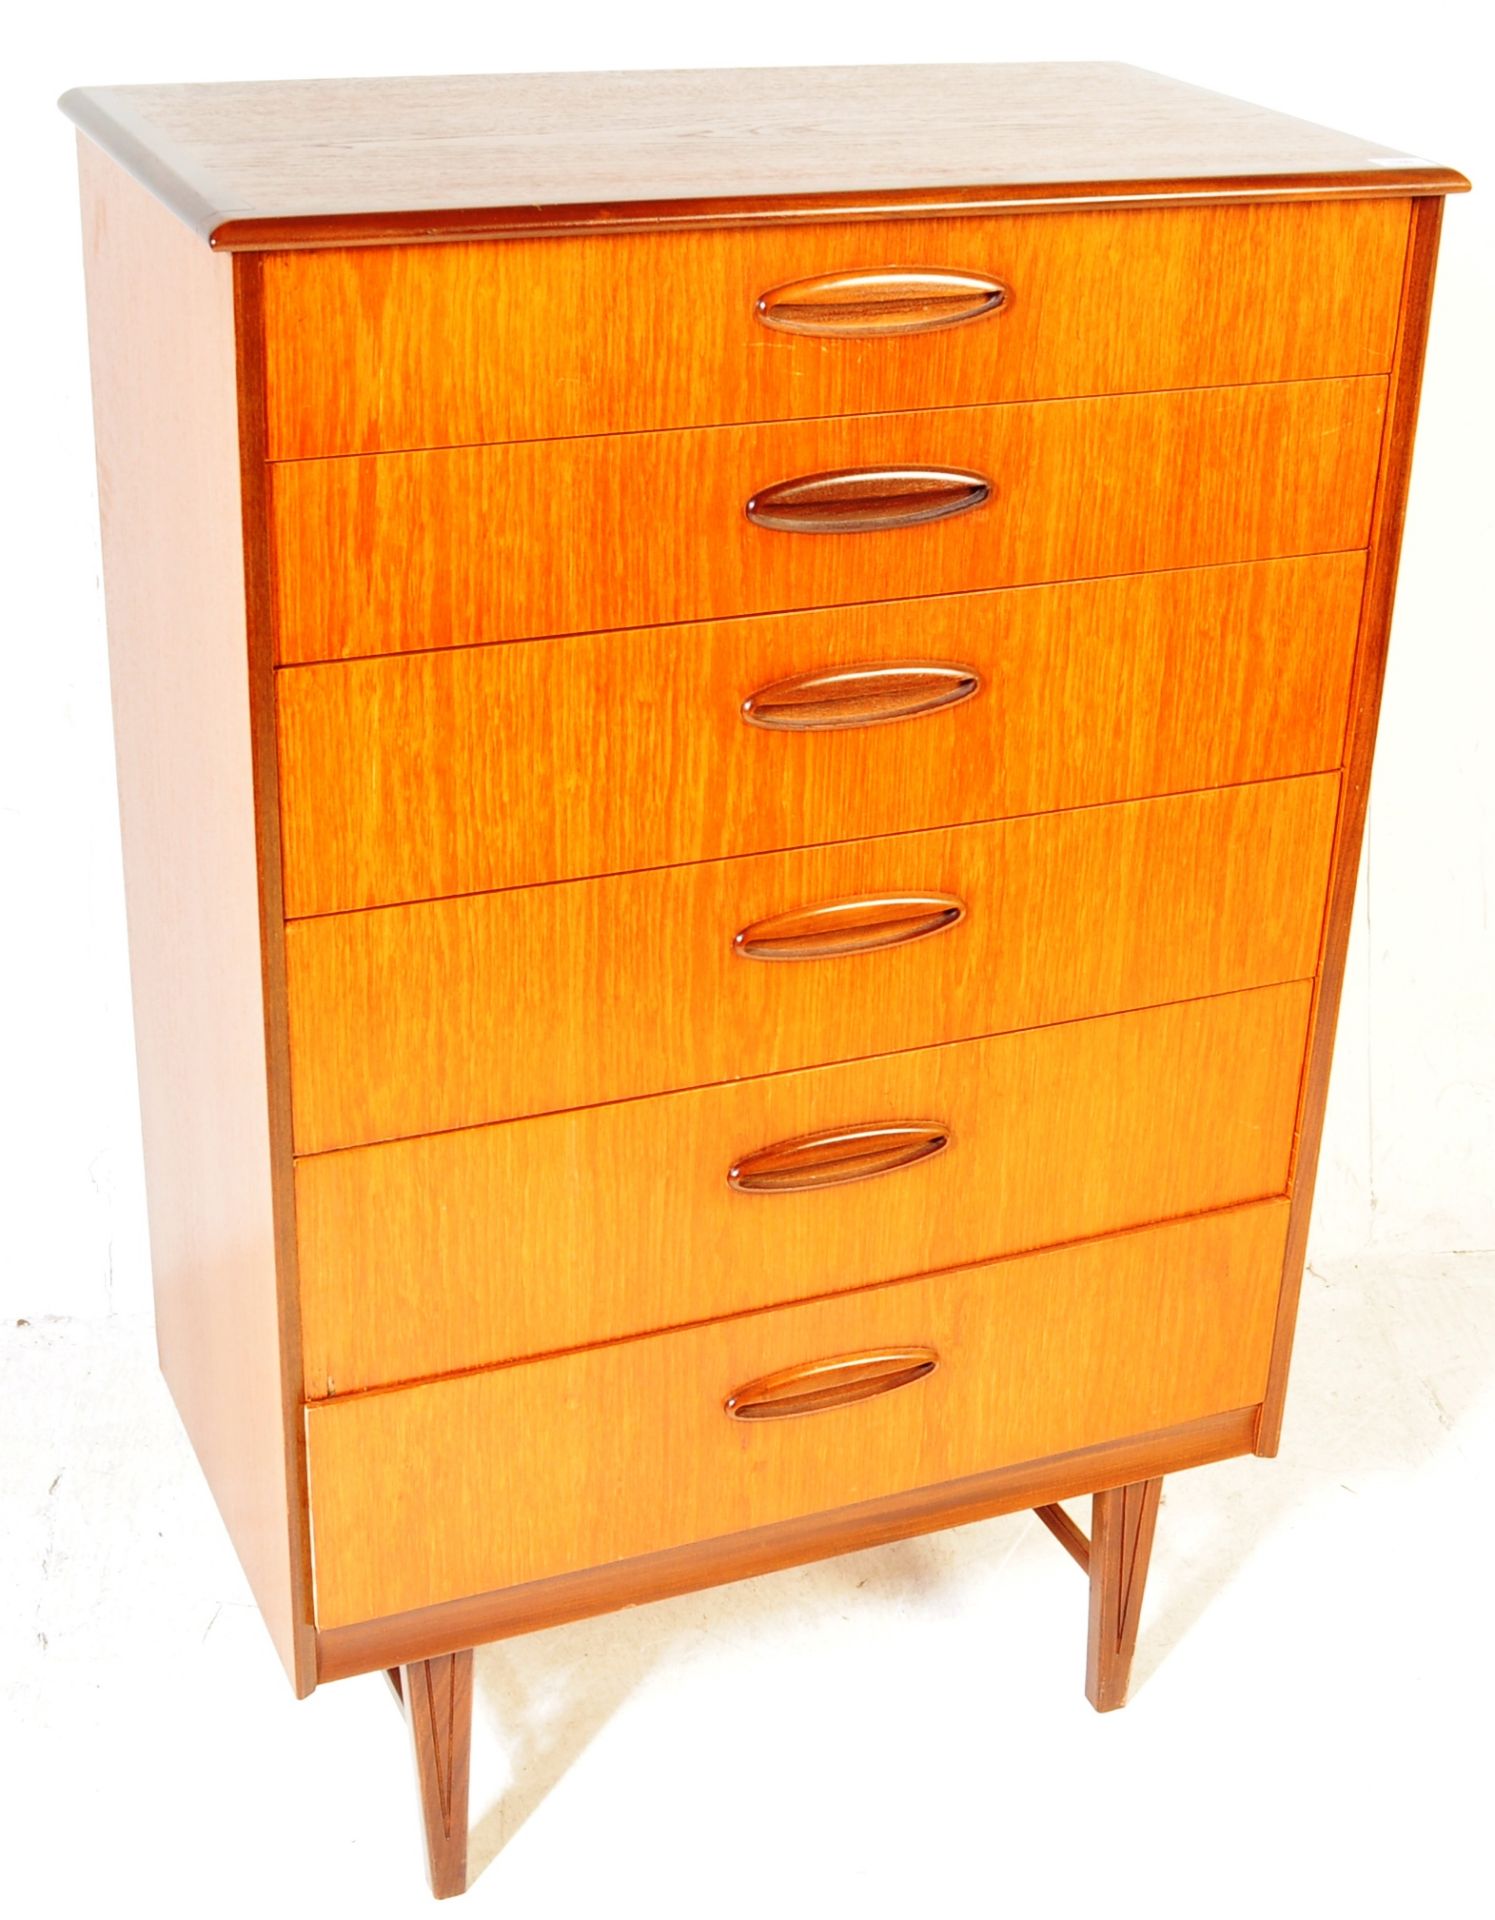 MID 20TH CENTURY TEAK CHEST OF DRAWERS - Image 2 of 7